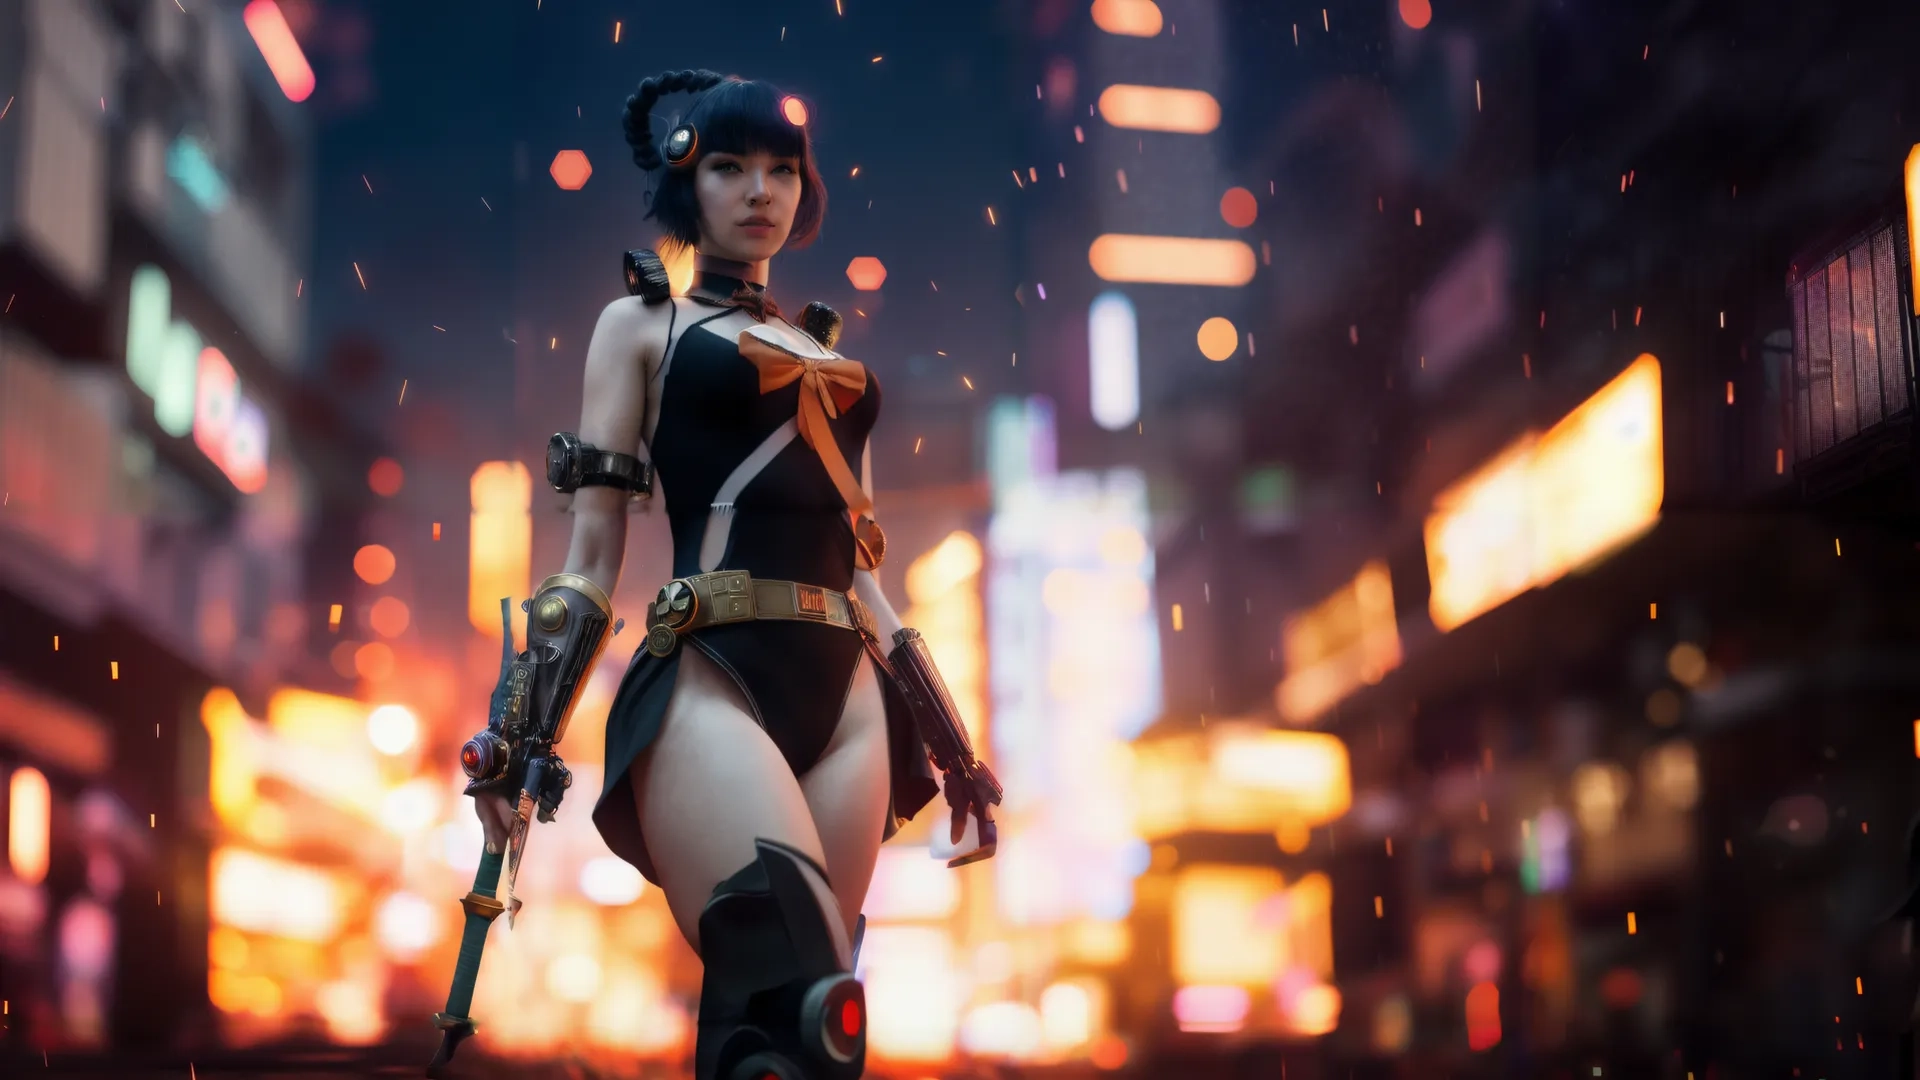 an image of a woman in a full body outfit playing a game at night, walking through the city street and some brightly lights are shining behind her
